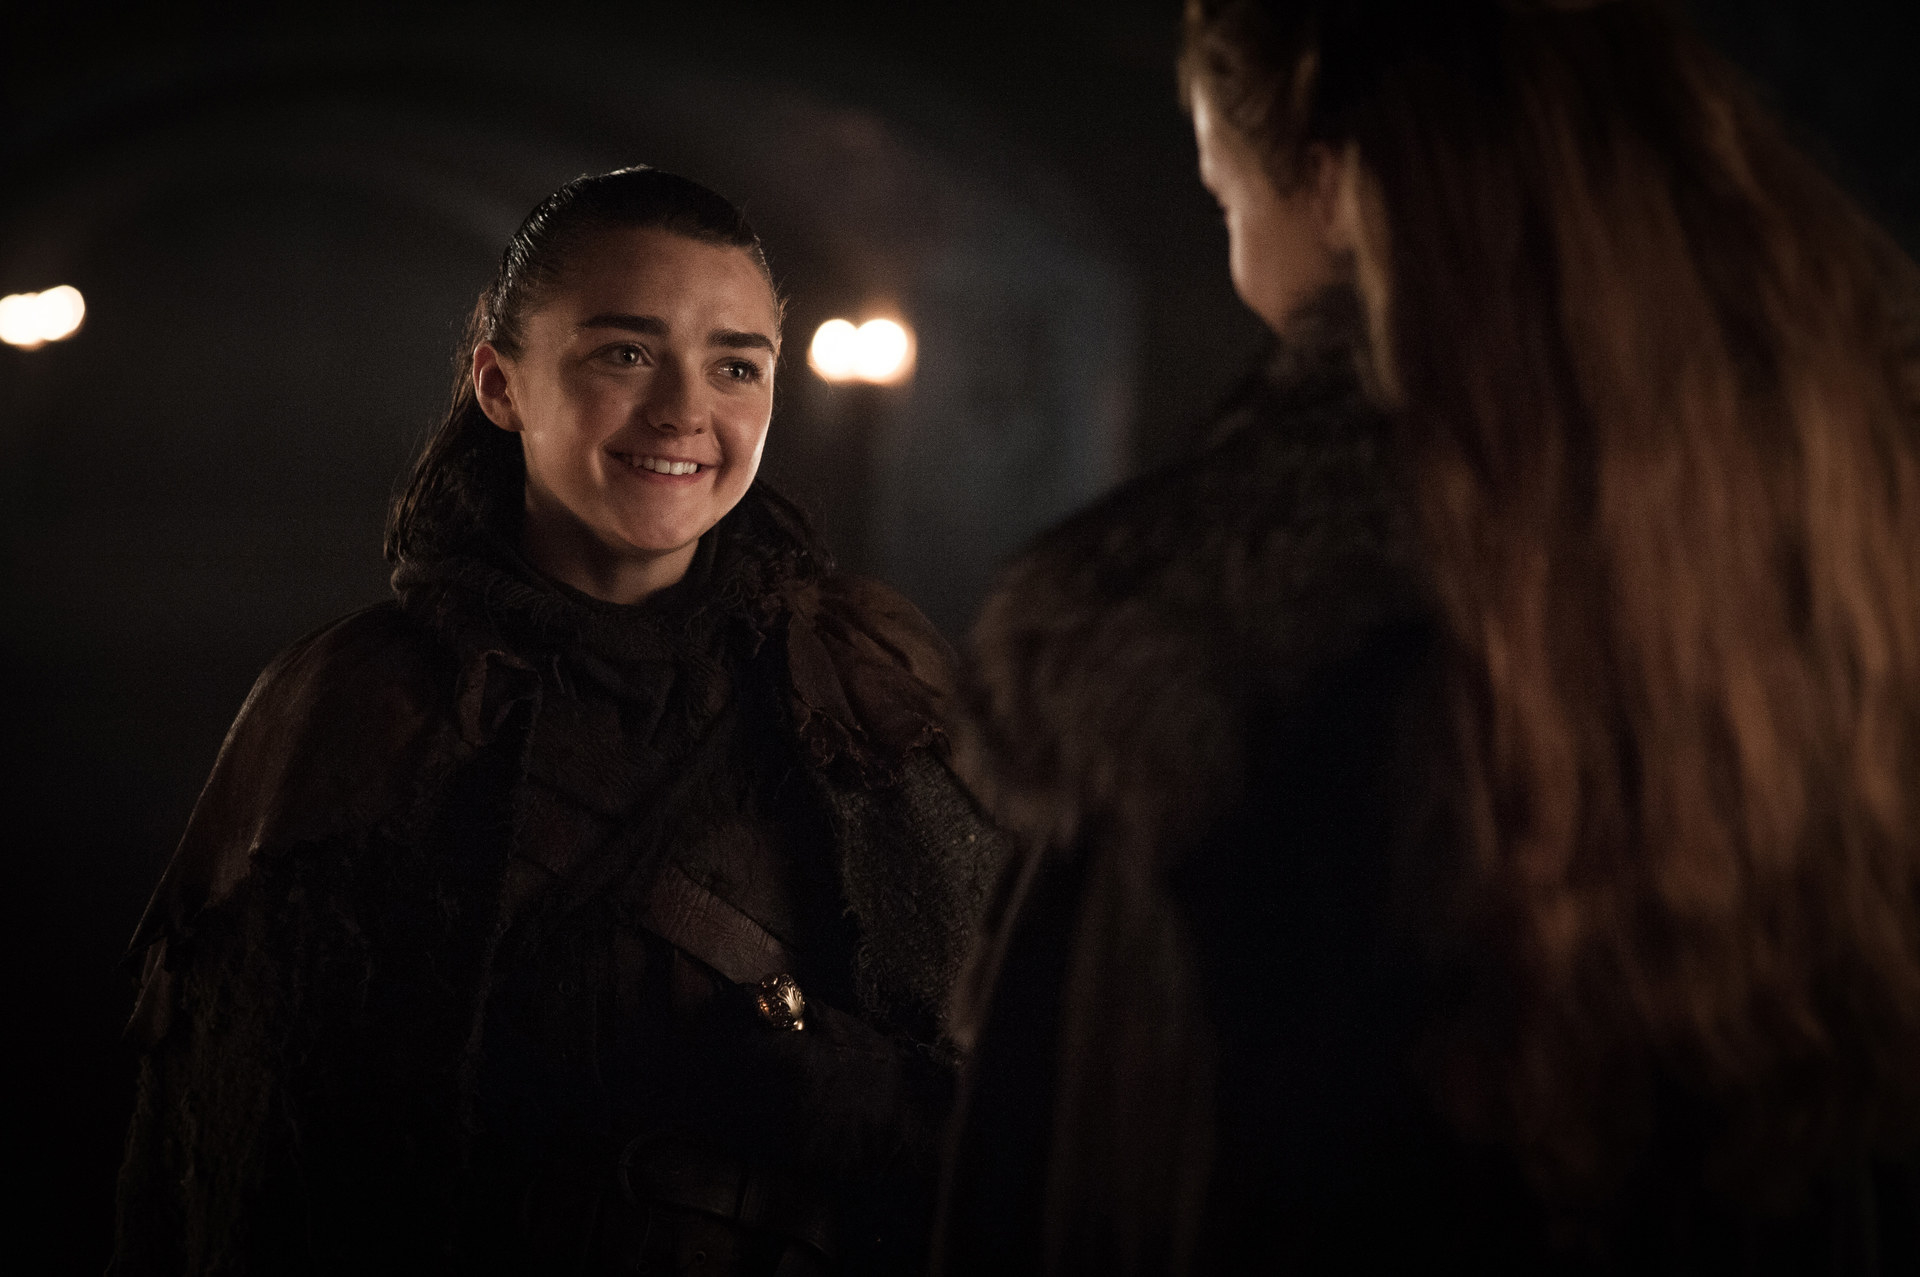 Arya smiles while talking to her sister played by Sophie Turner